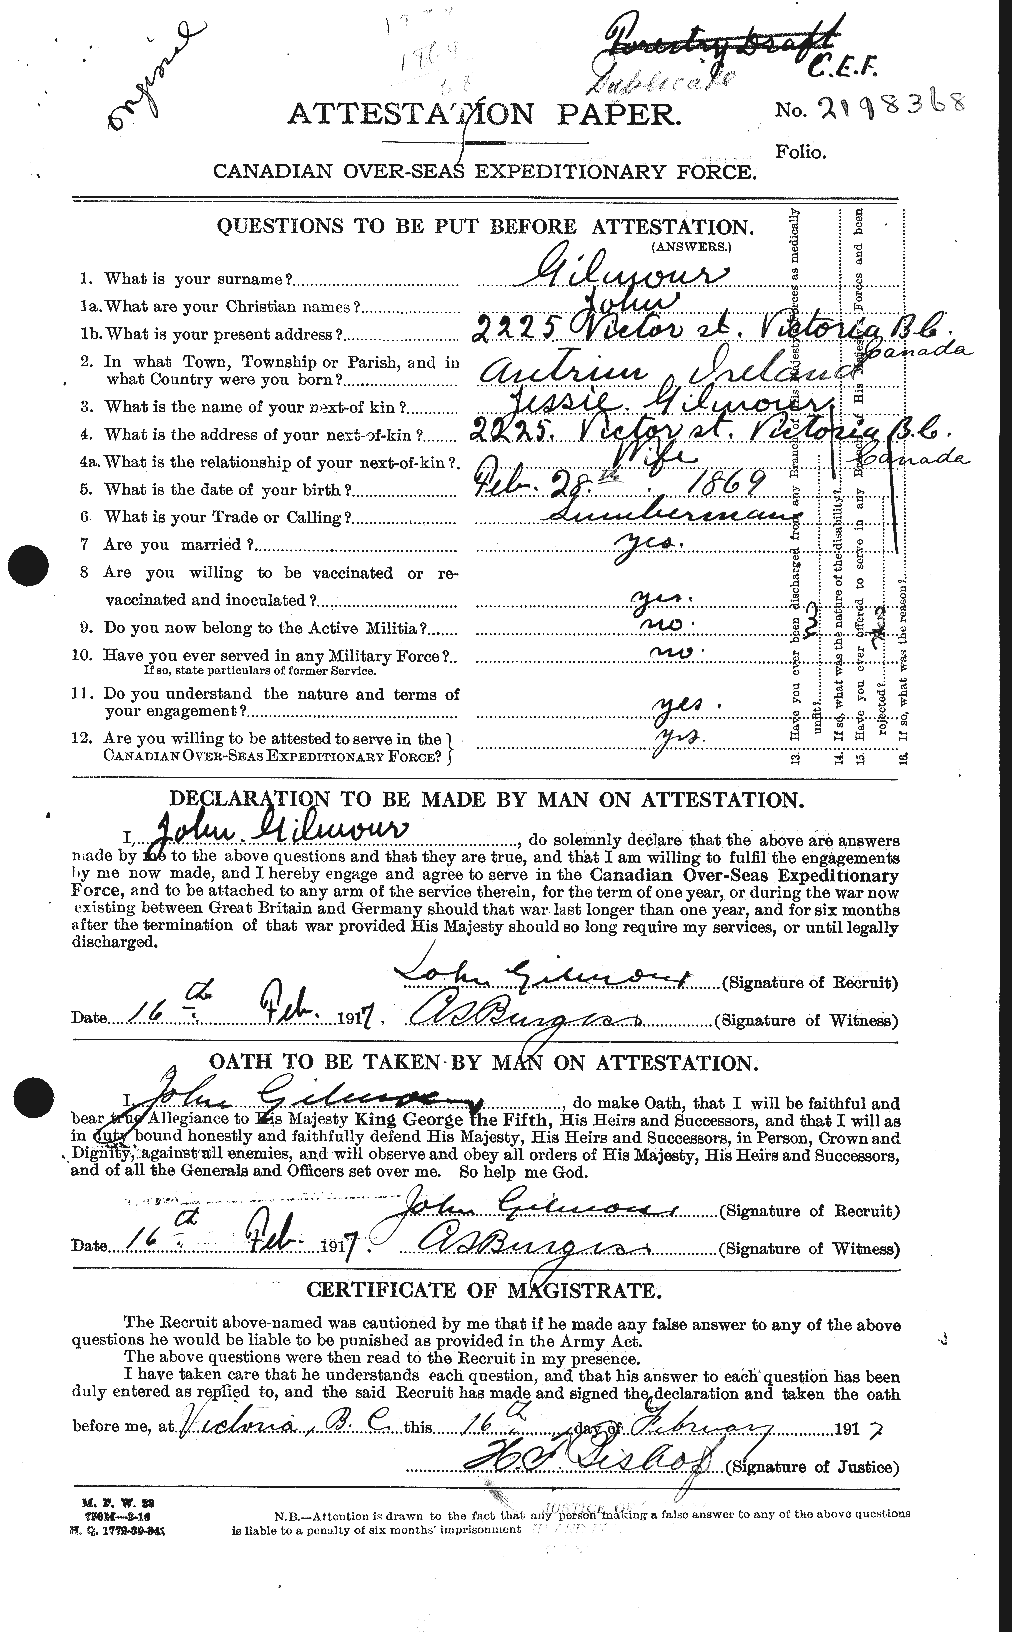 Personnel Records of the First World War - CEF 350968a